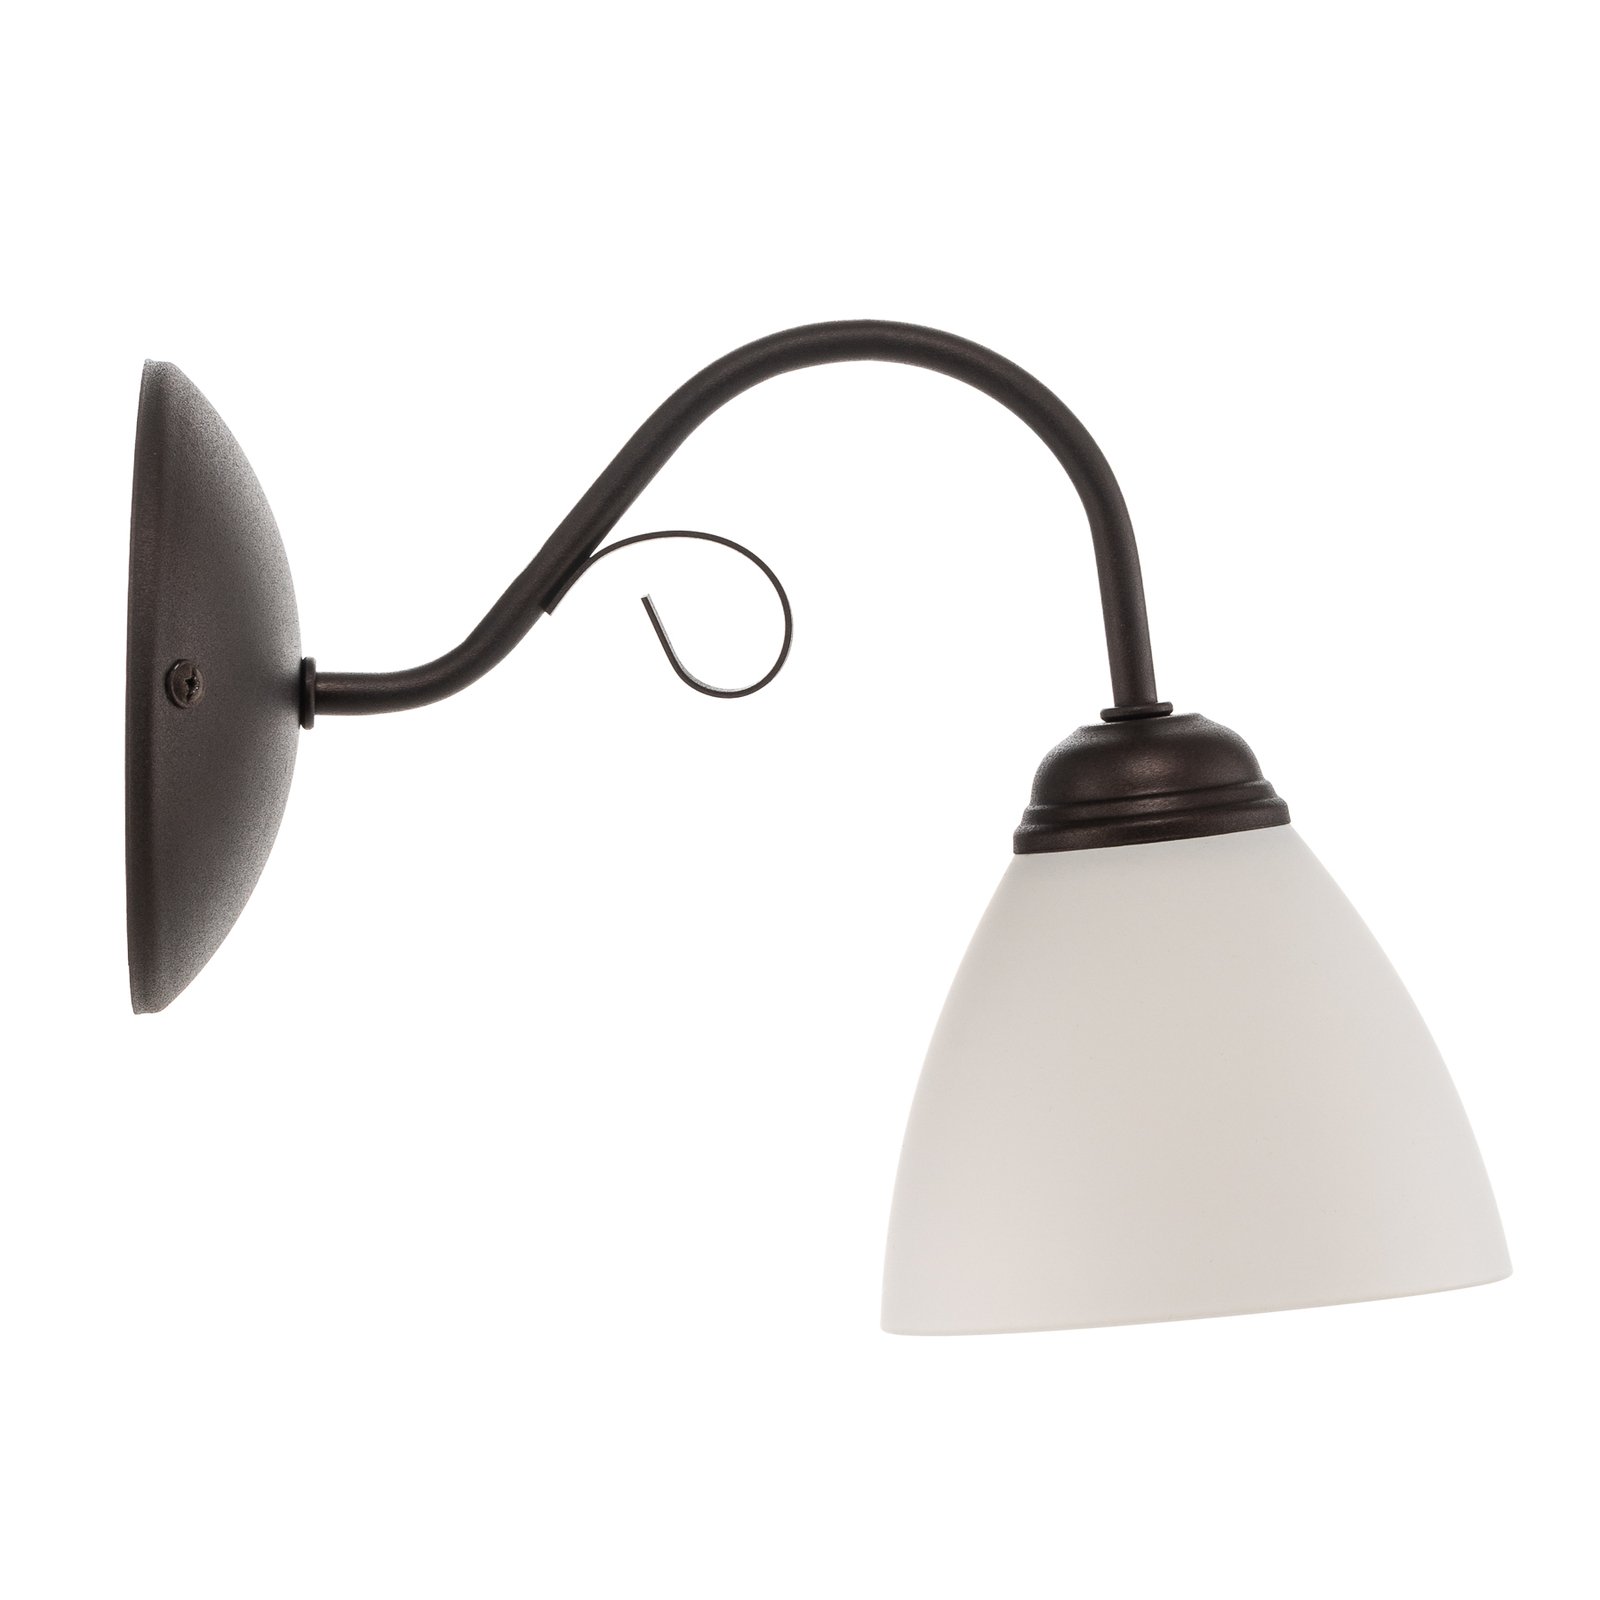 Adoro wall light with a glass lampshade, brown